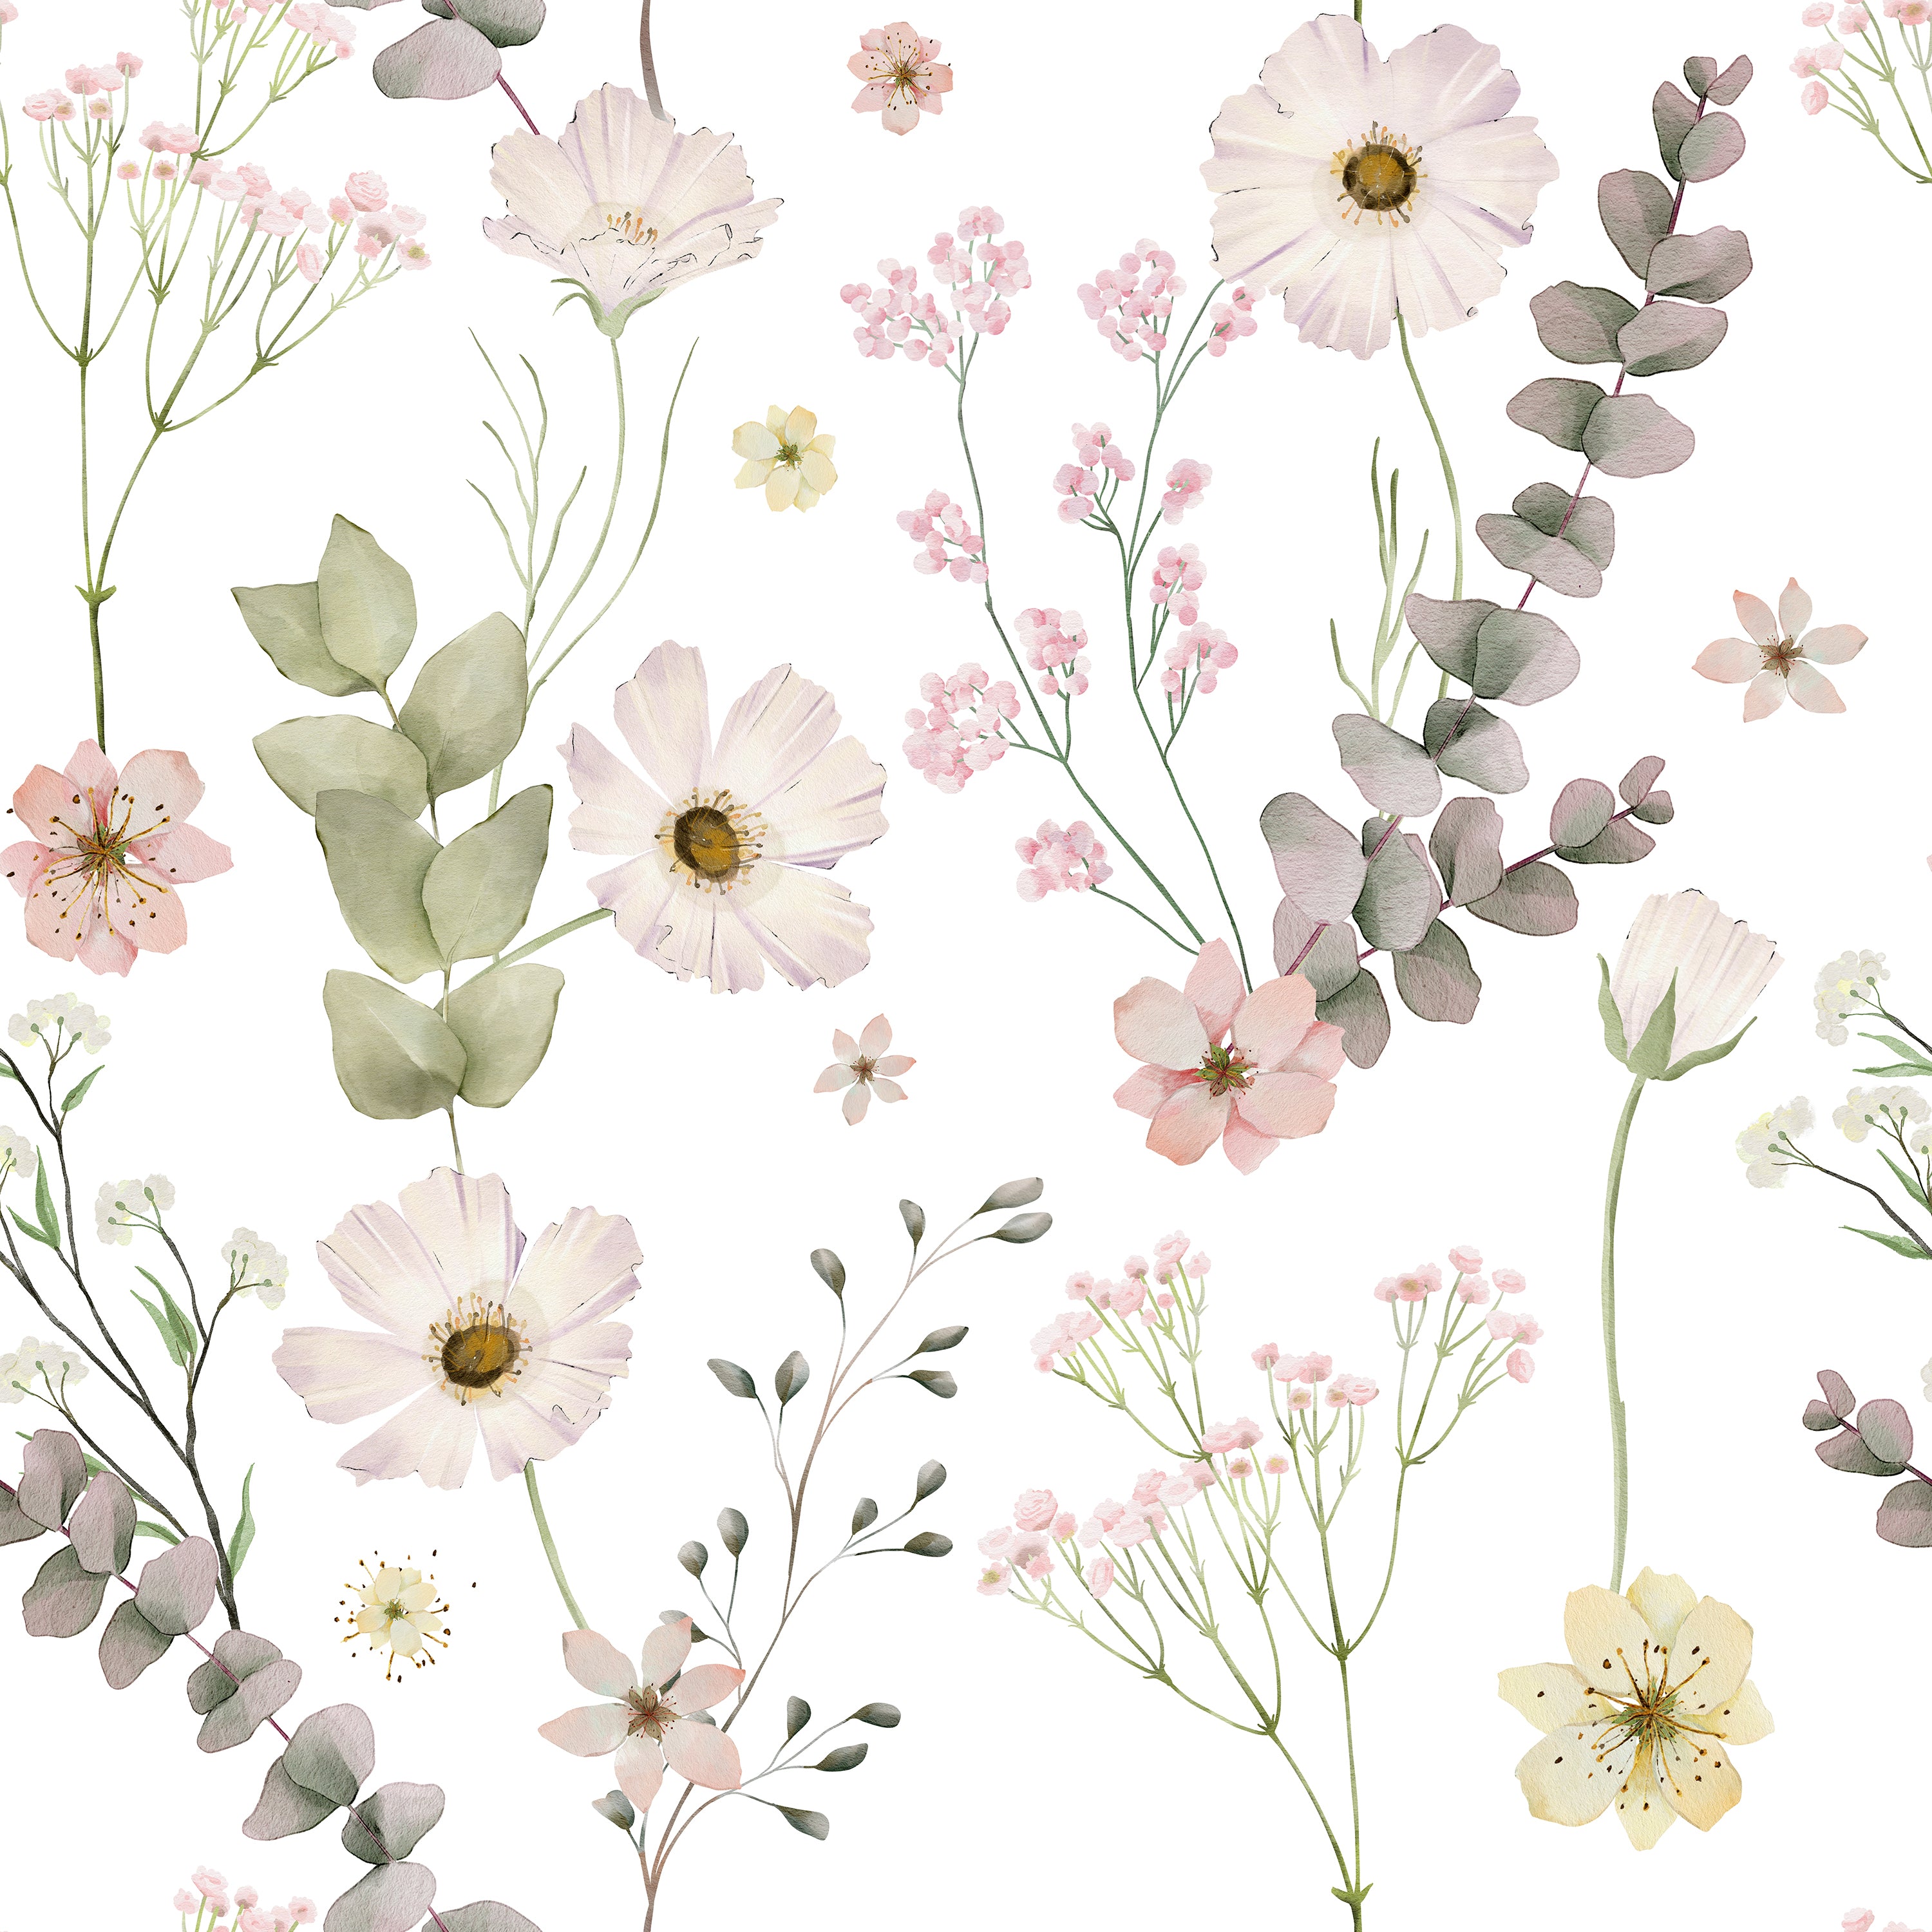 A close-up view of the Botanical Muse Wallpaper pattern, showcasing watercolor illustrations of dainty flowers in shades of pink and cream, with detailed green and eucalyptus leaves on a white background, conveying a light and airy botanical theme.